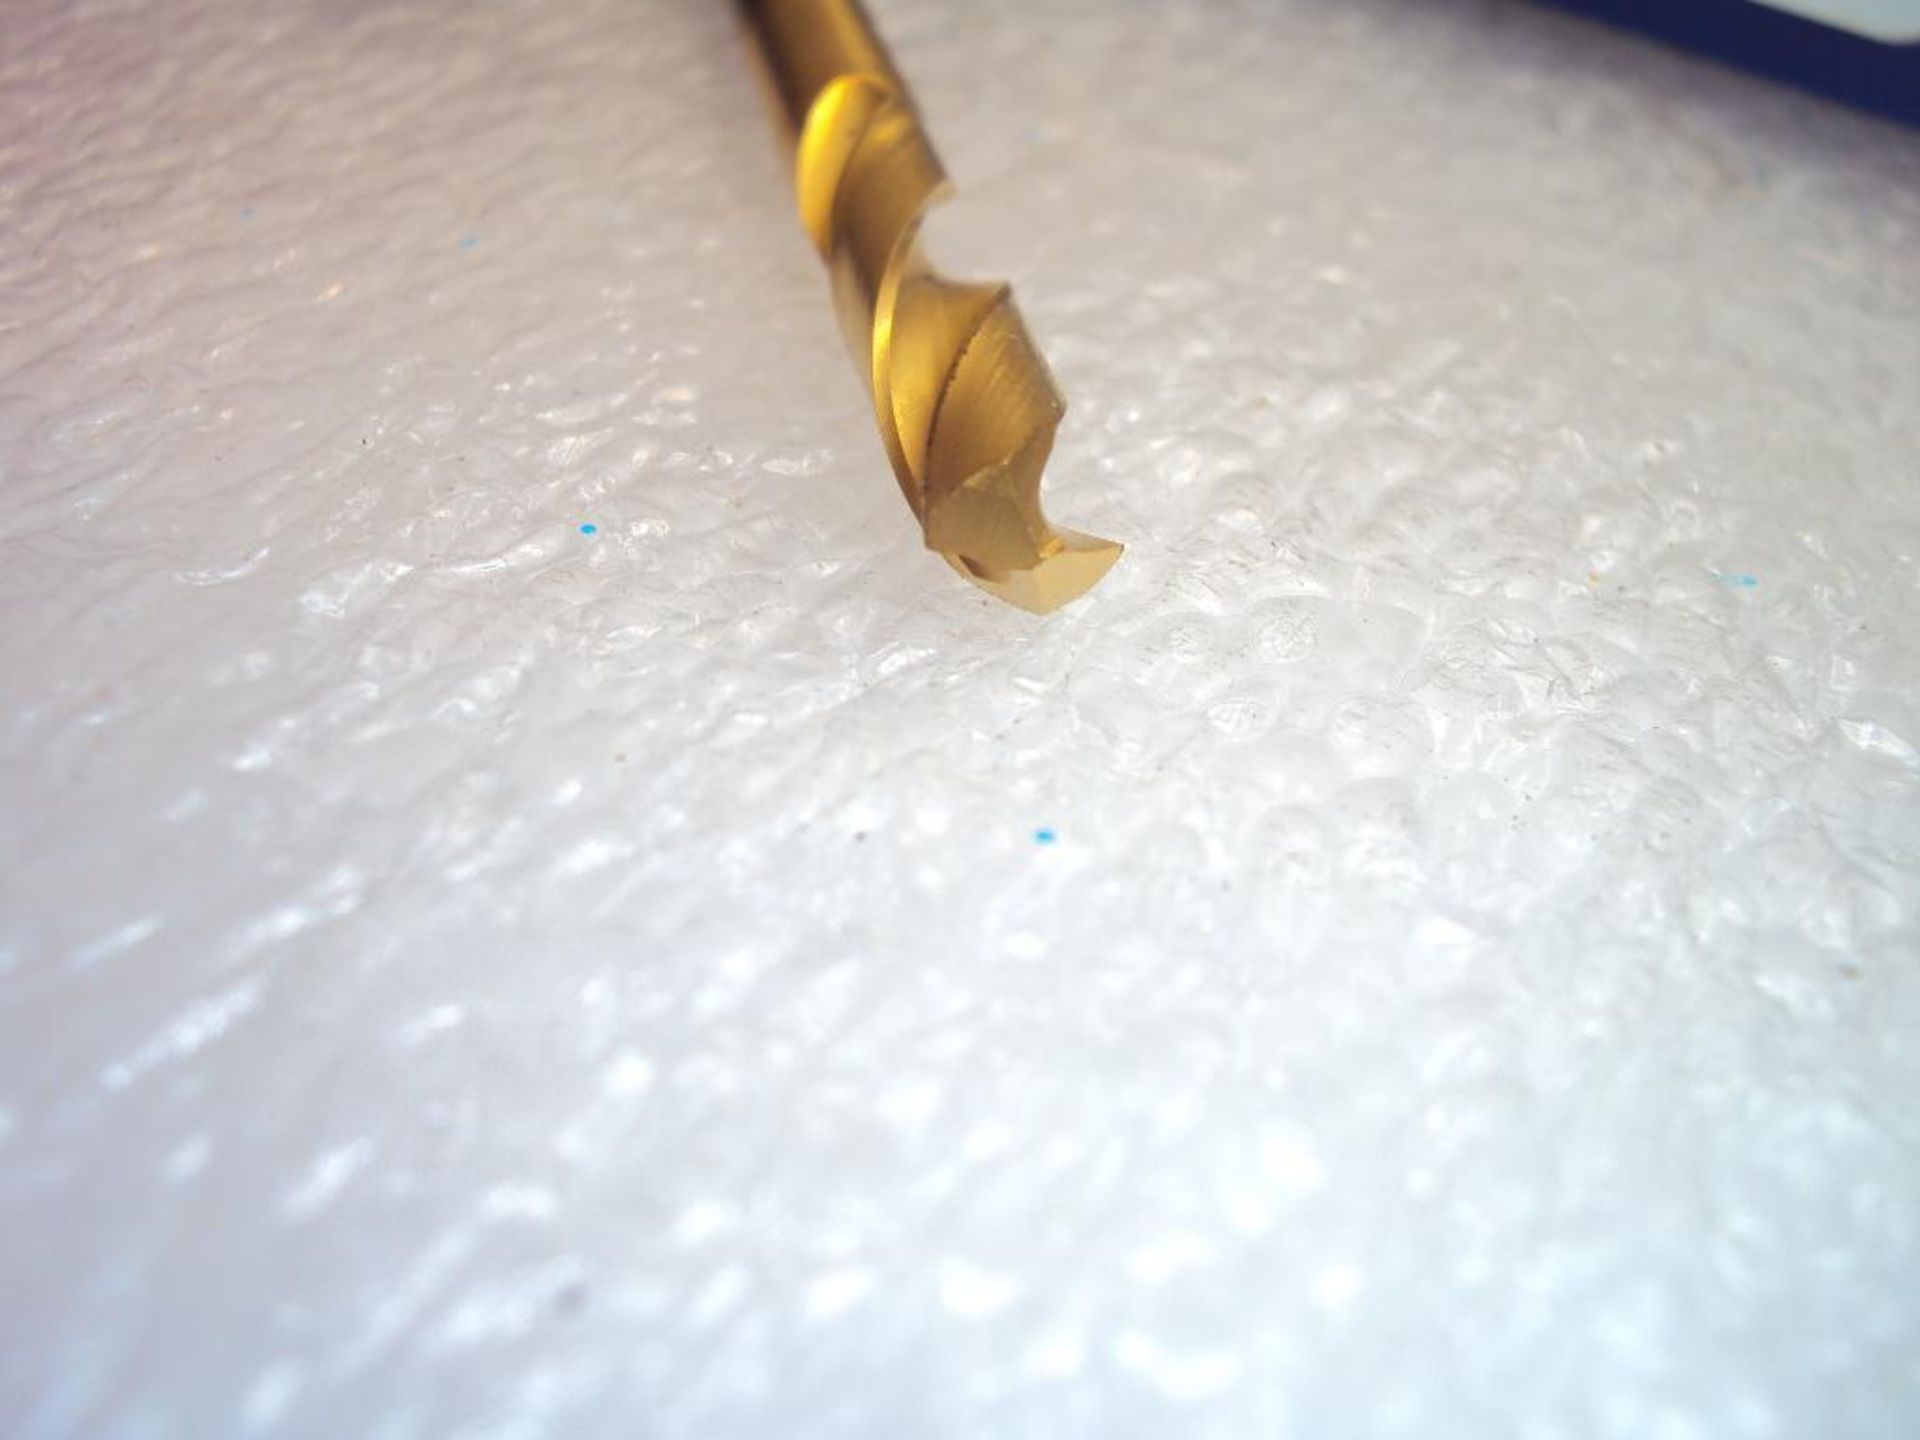 Lot 7/32" Solid Carbide Drill Bits - Image 3 of 5